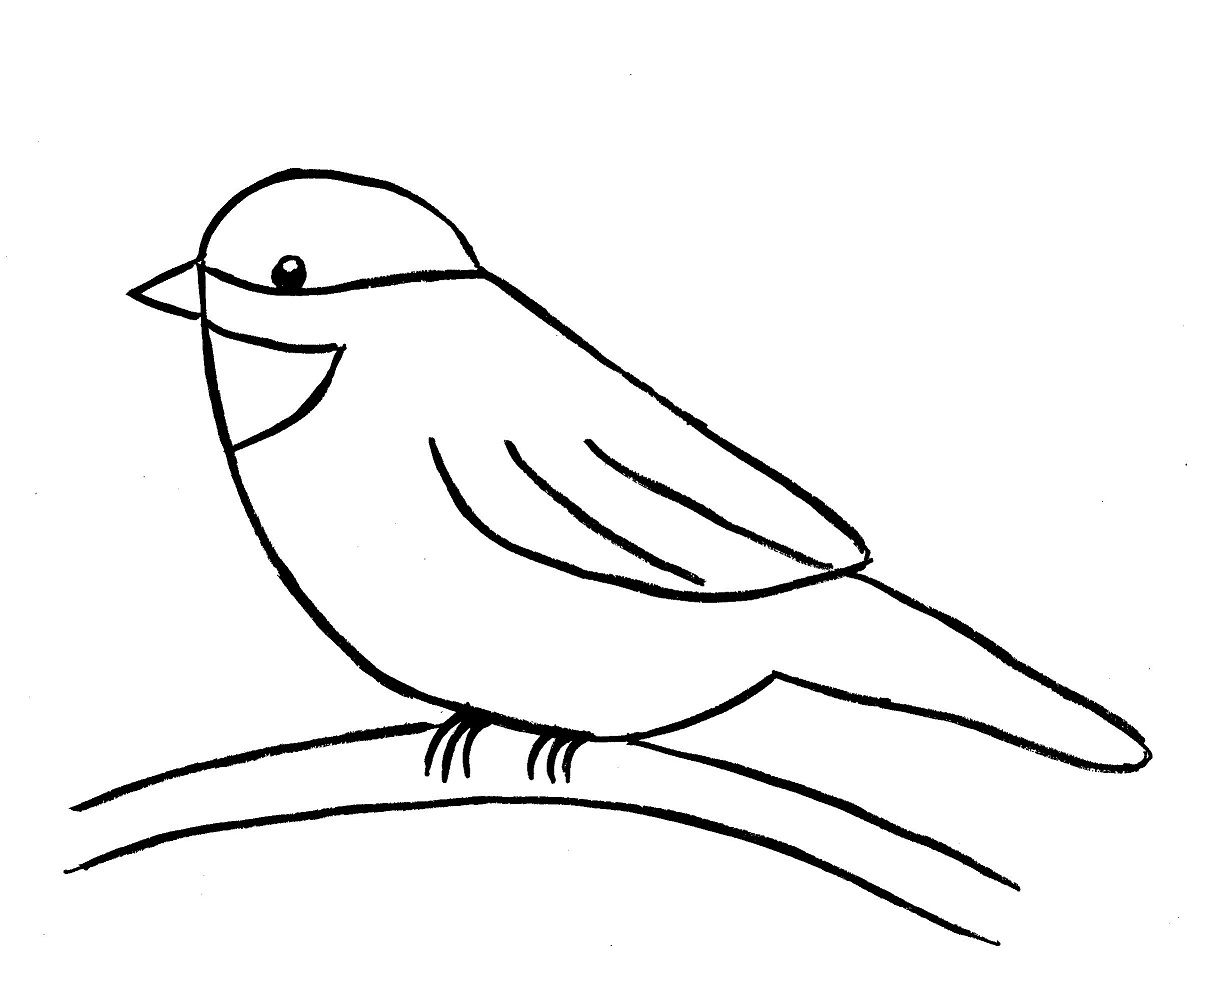 How To Draw A Bird Step By Step Easy With Pictures | Dessin à Dessin D Oiseau Simple